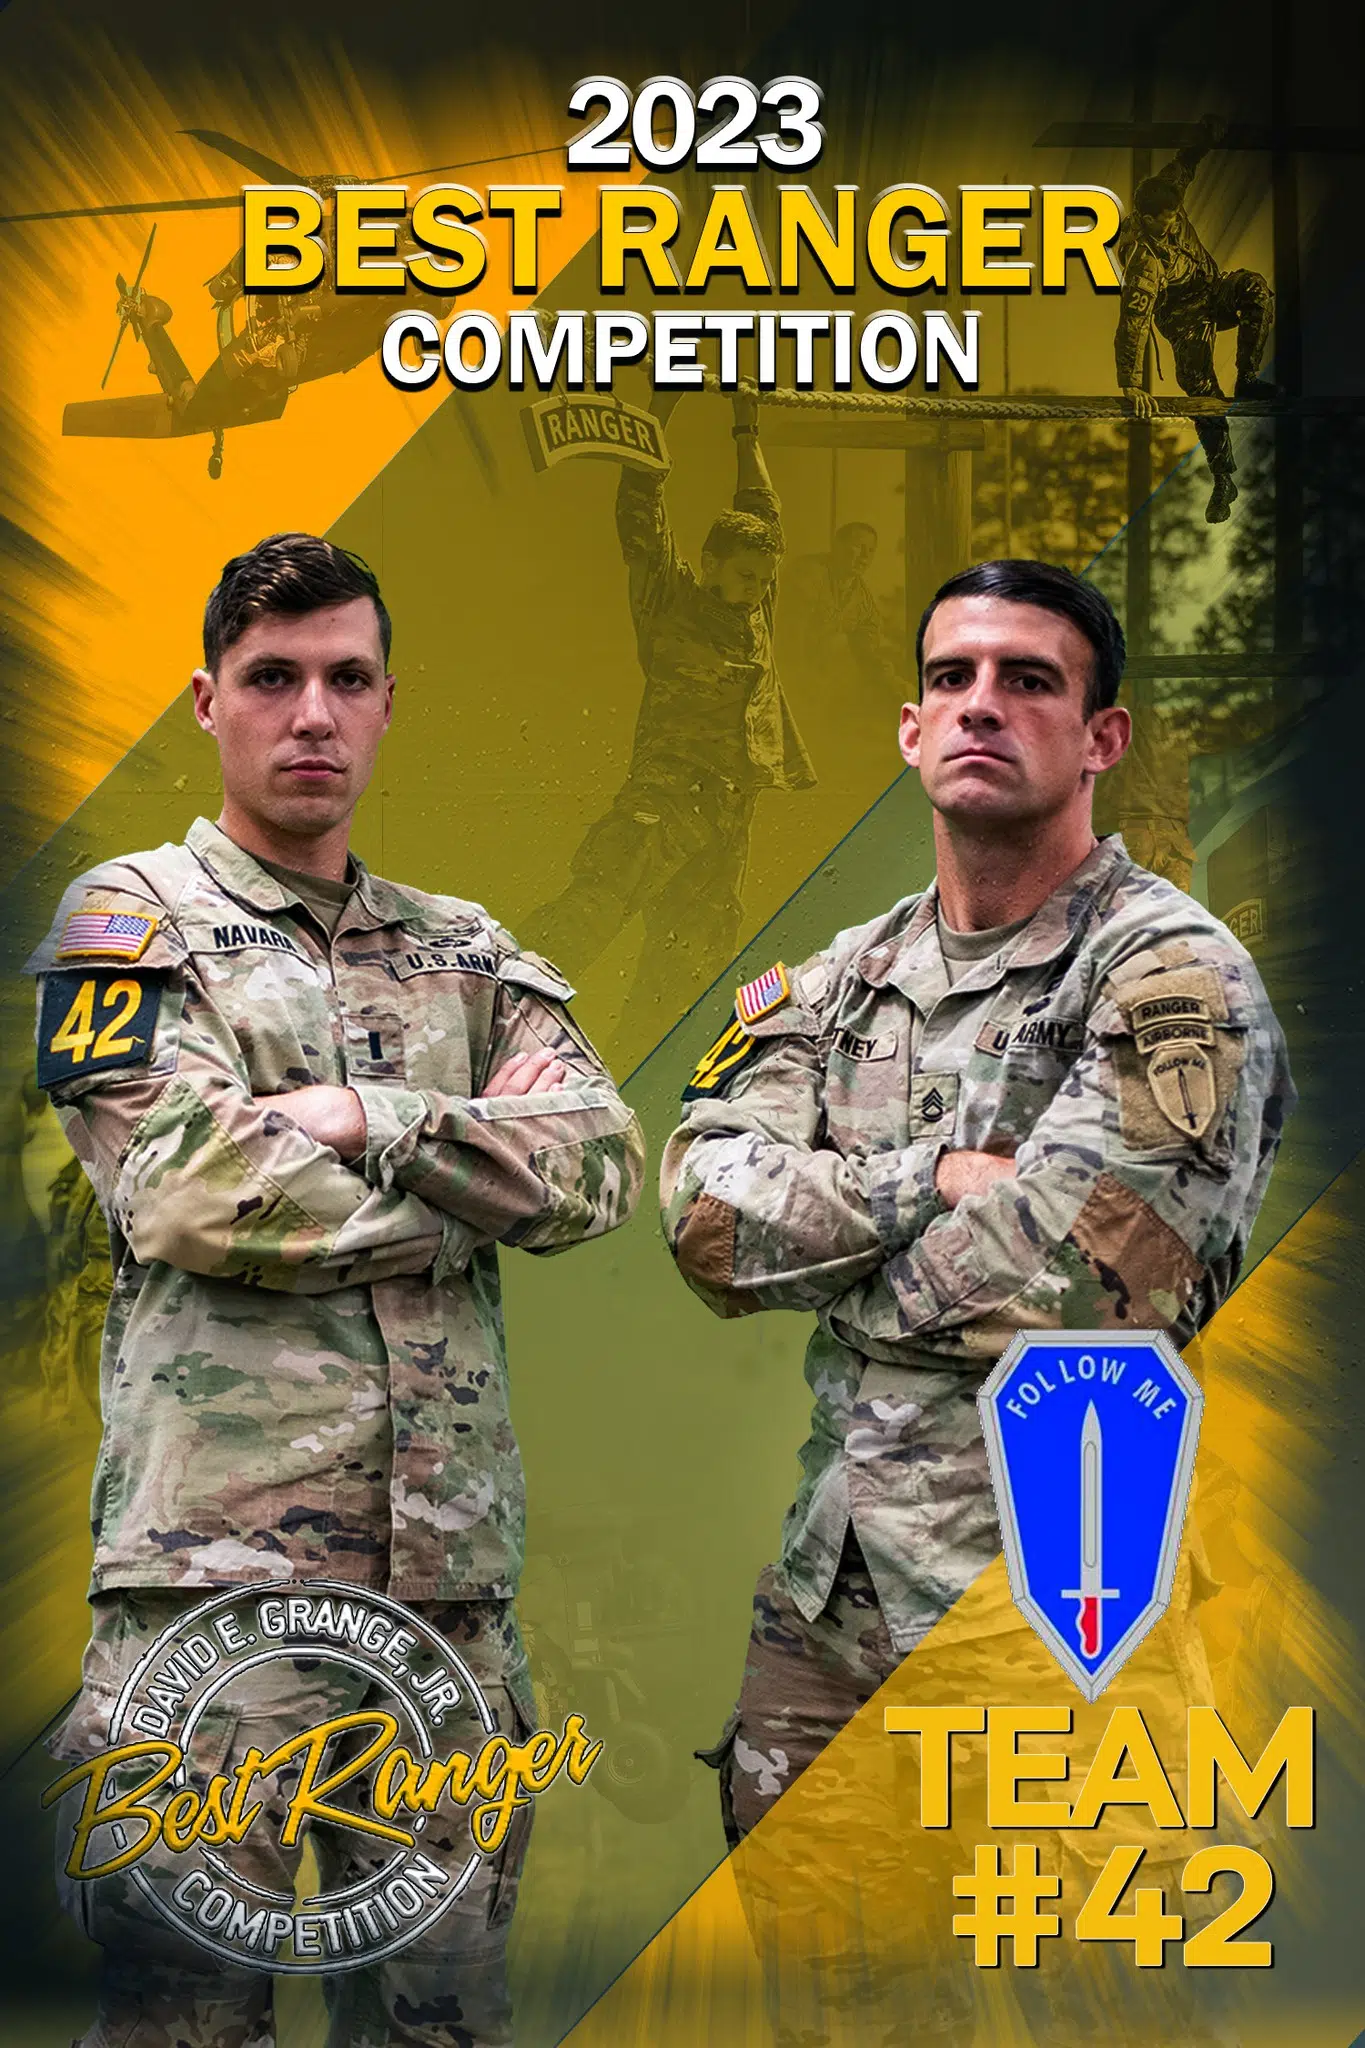 Manitowoc Native Finishes 6th in Best Ranger Competition Seehafer News